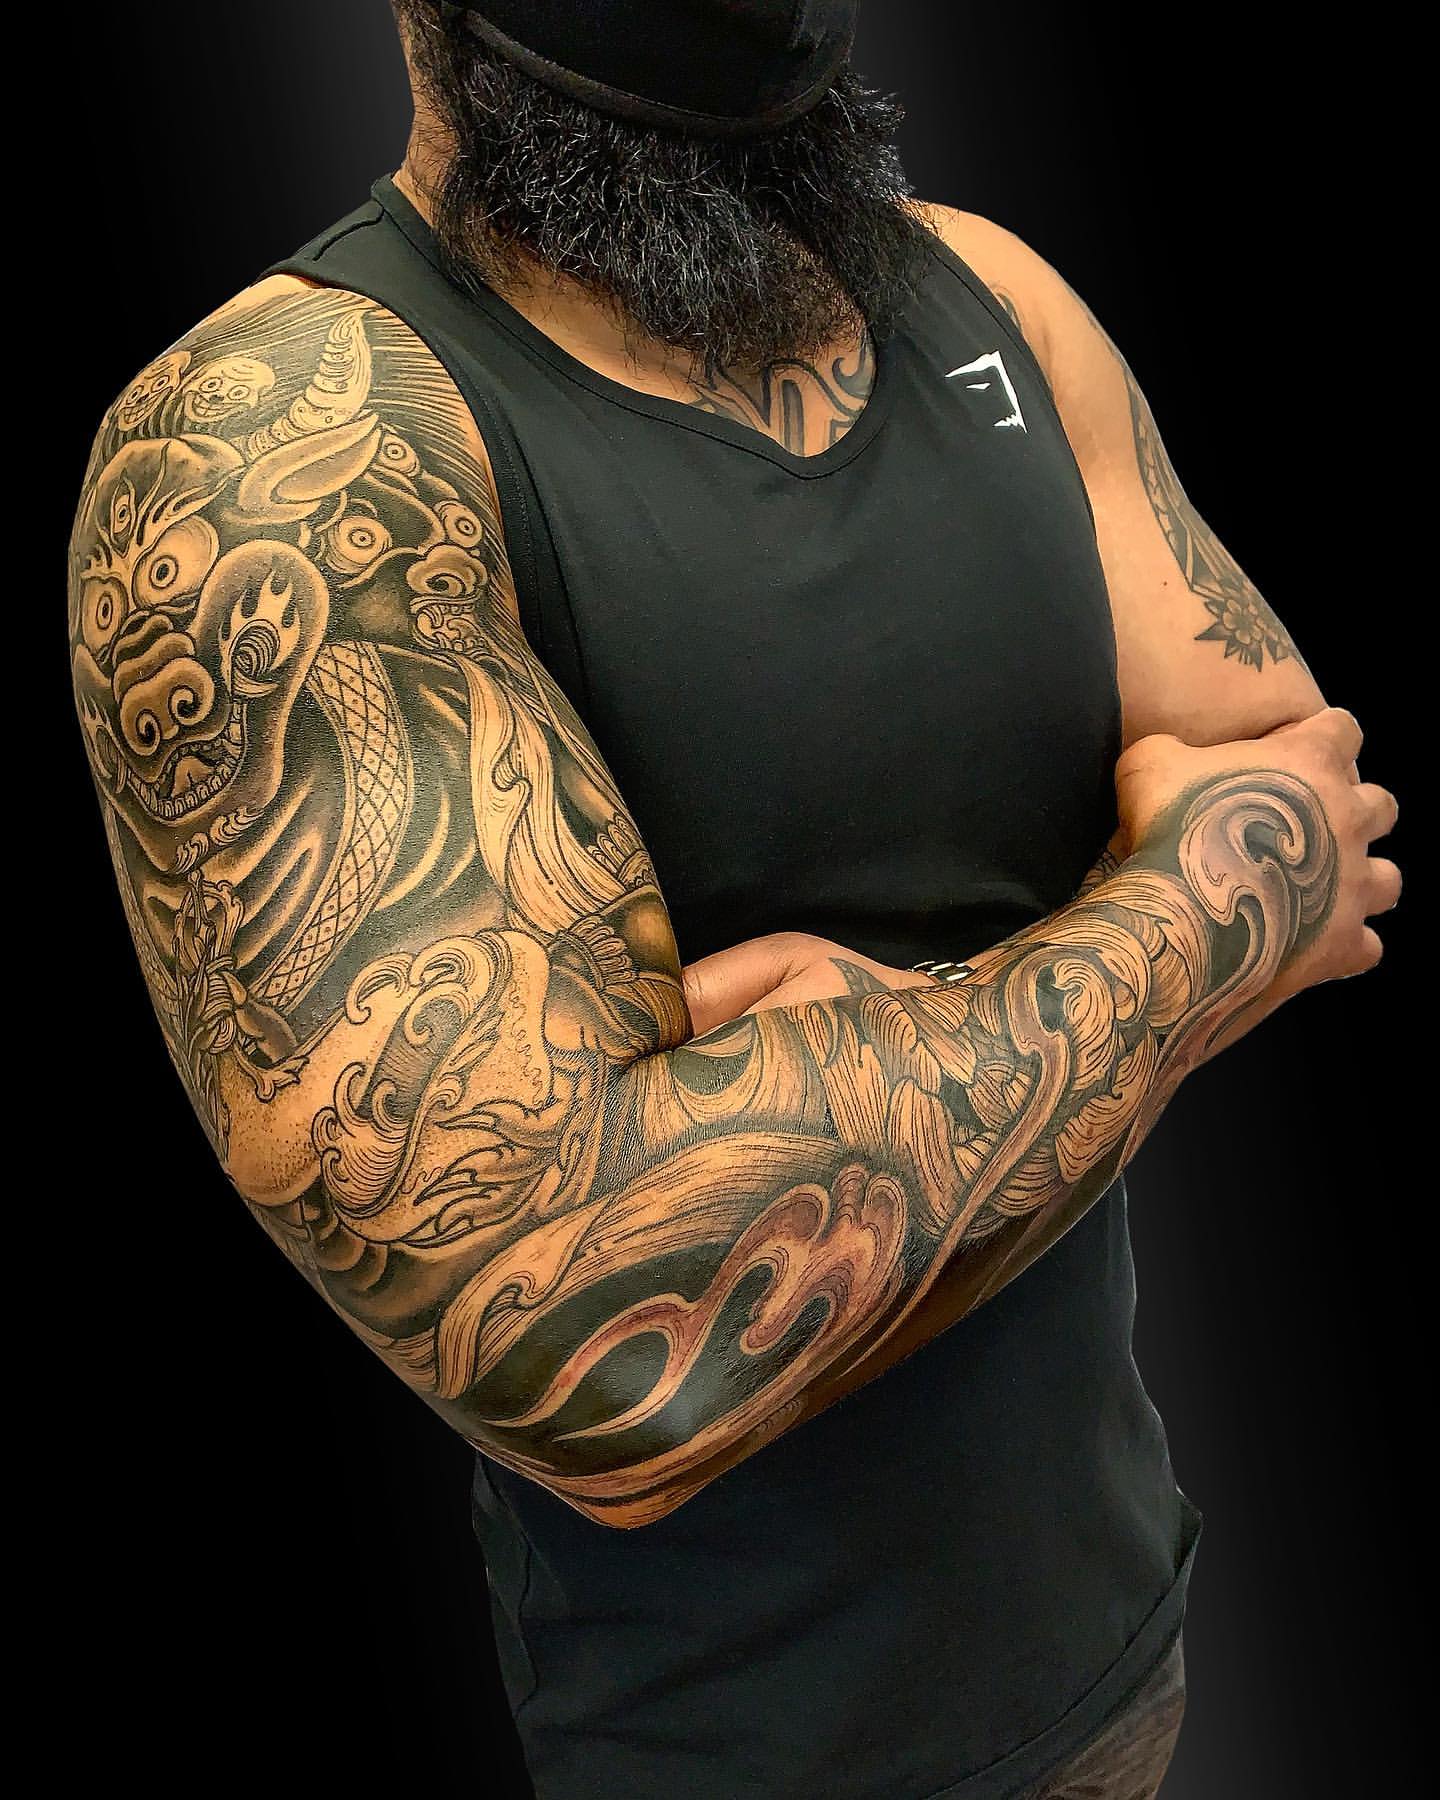 60+ Forearm Tattoo Design Ideas: Ultimate Guide (2023 Updated) - Saved Tattoo